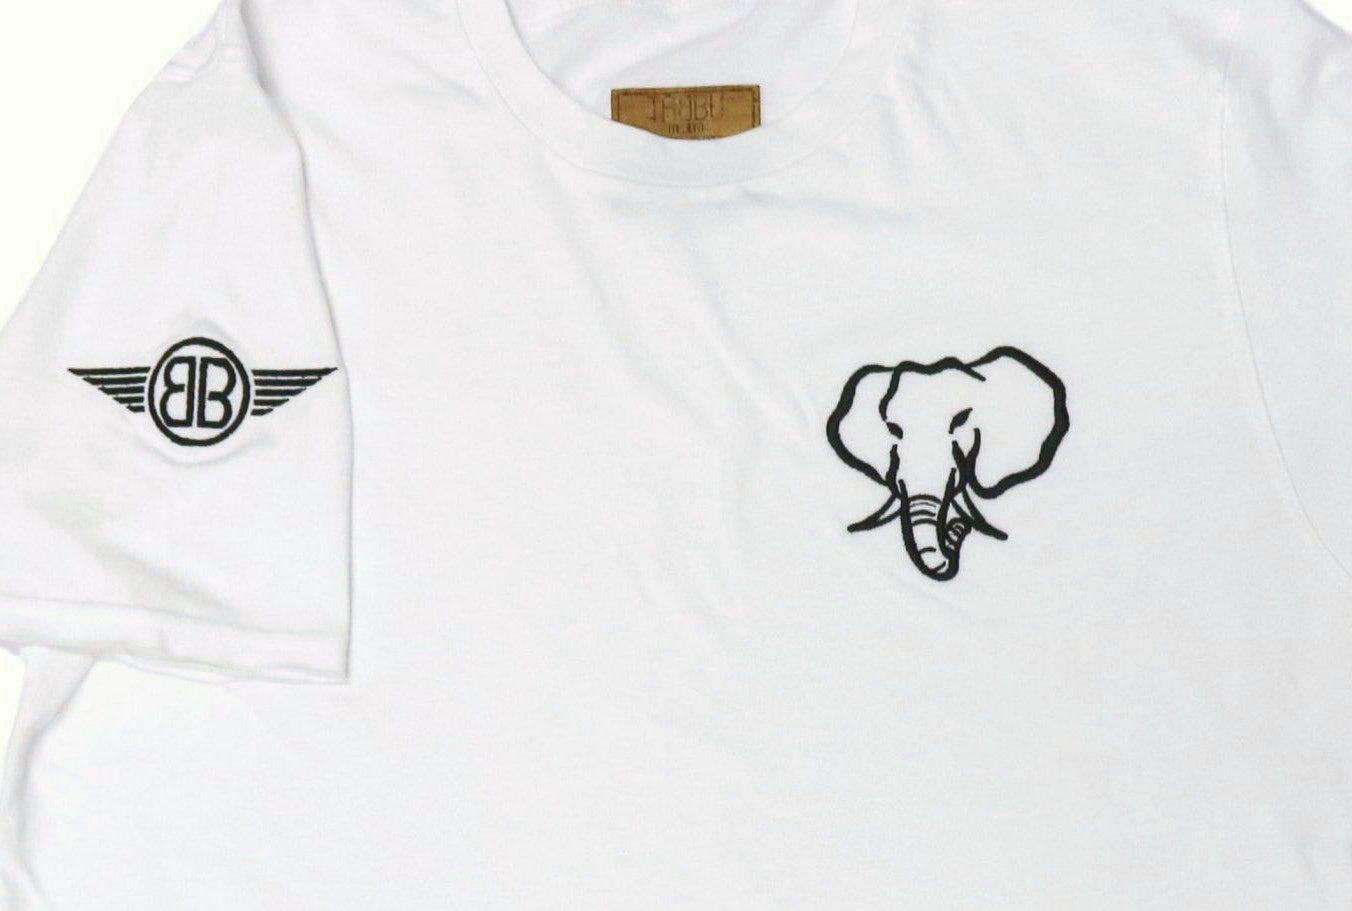 Oversized Elephant Head Tee in White with Black Embroidery